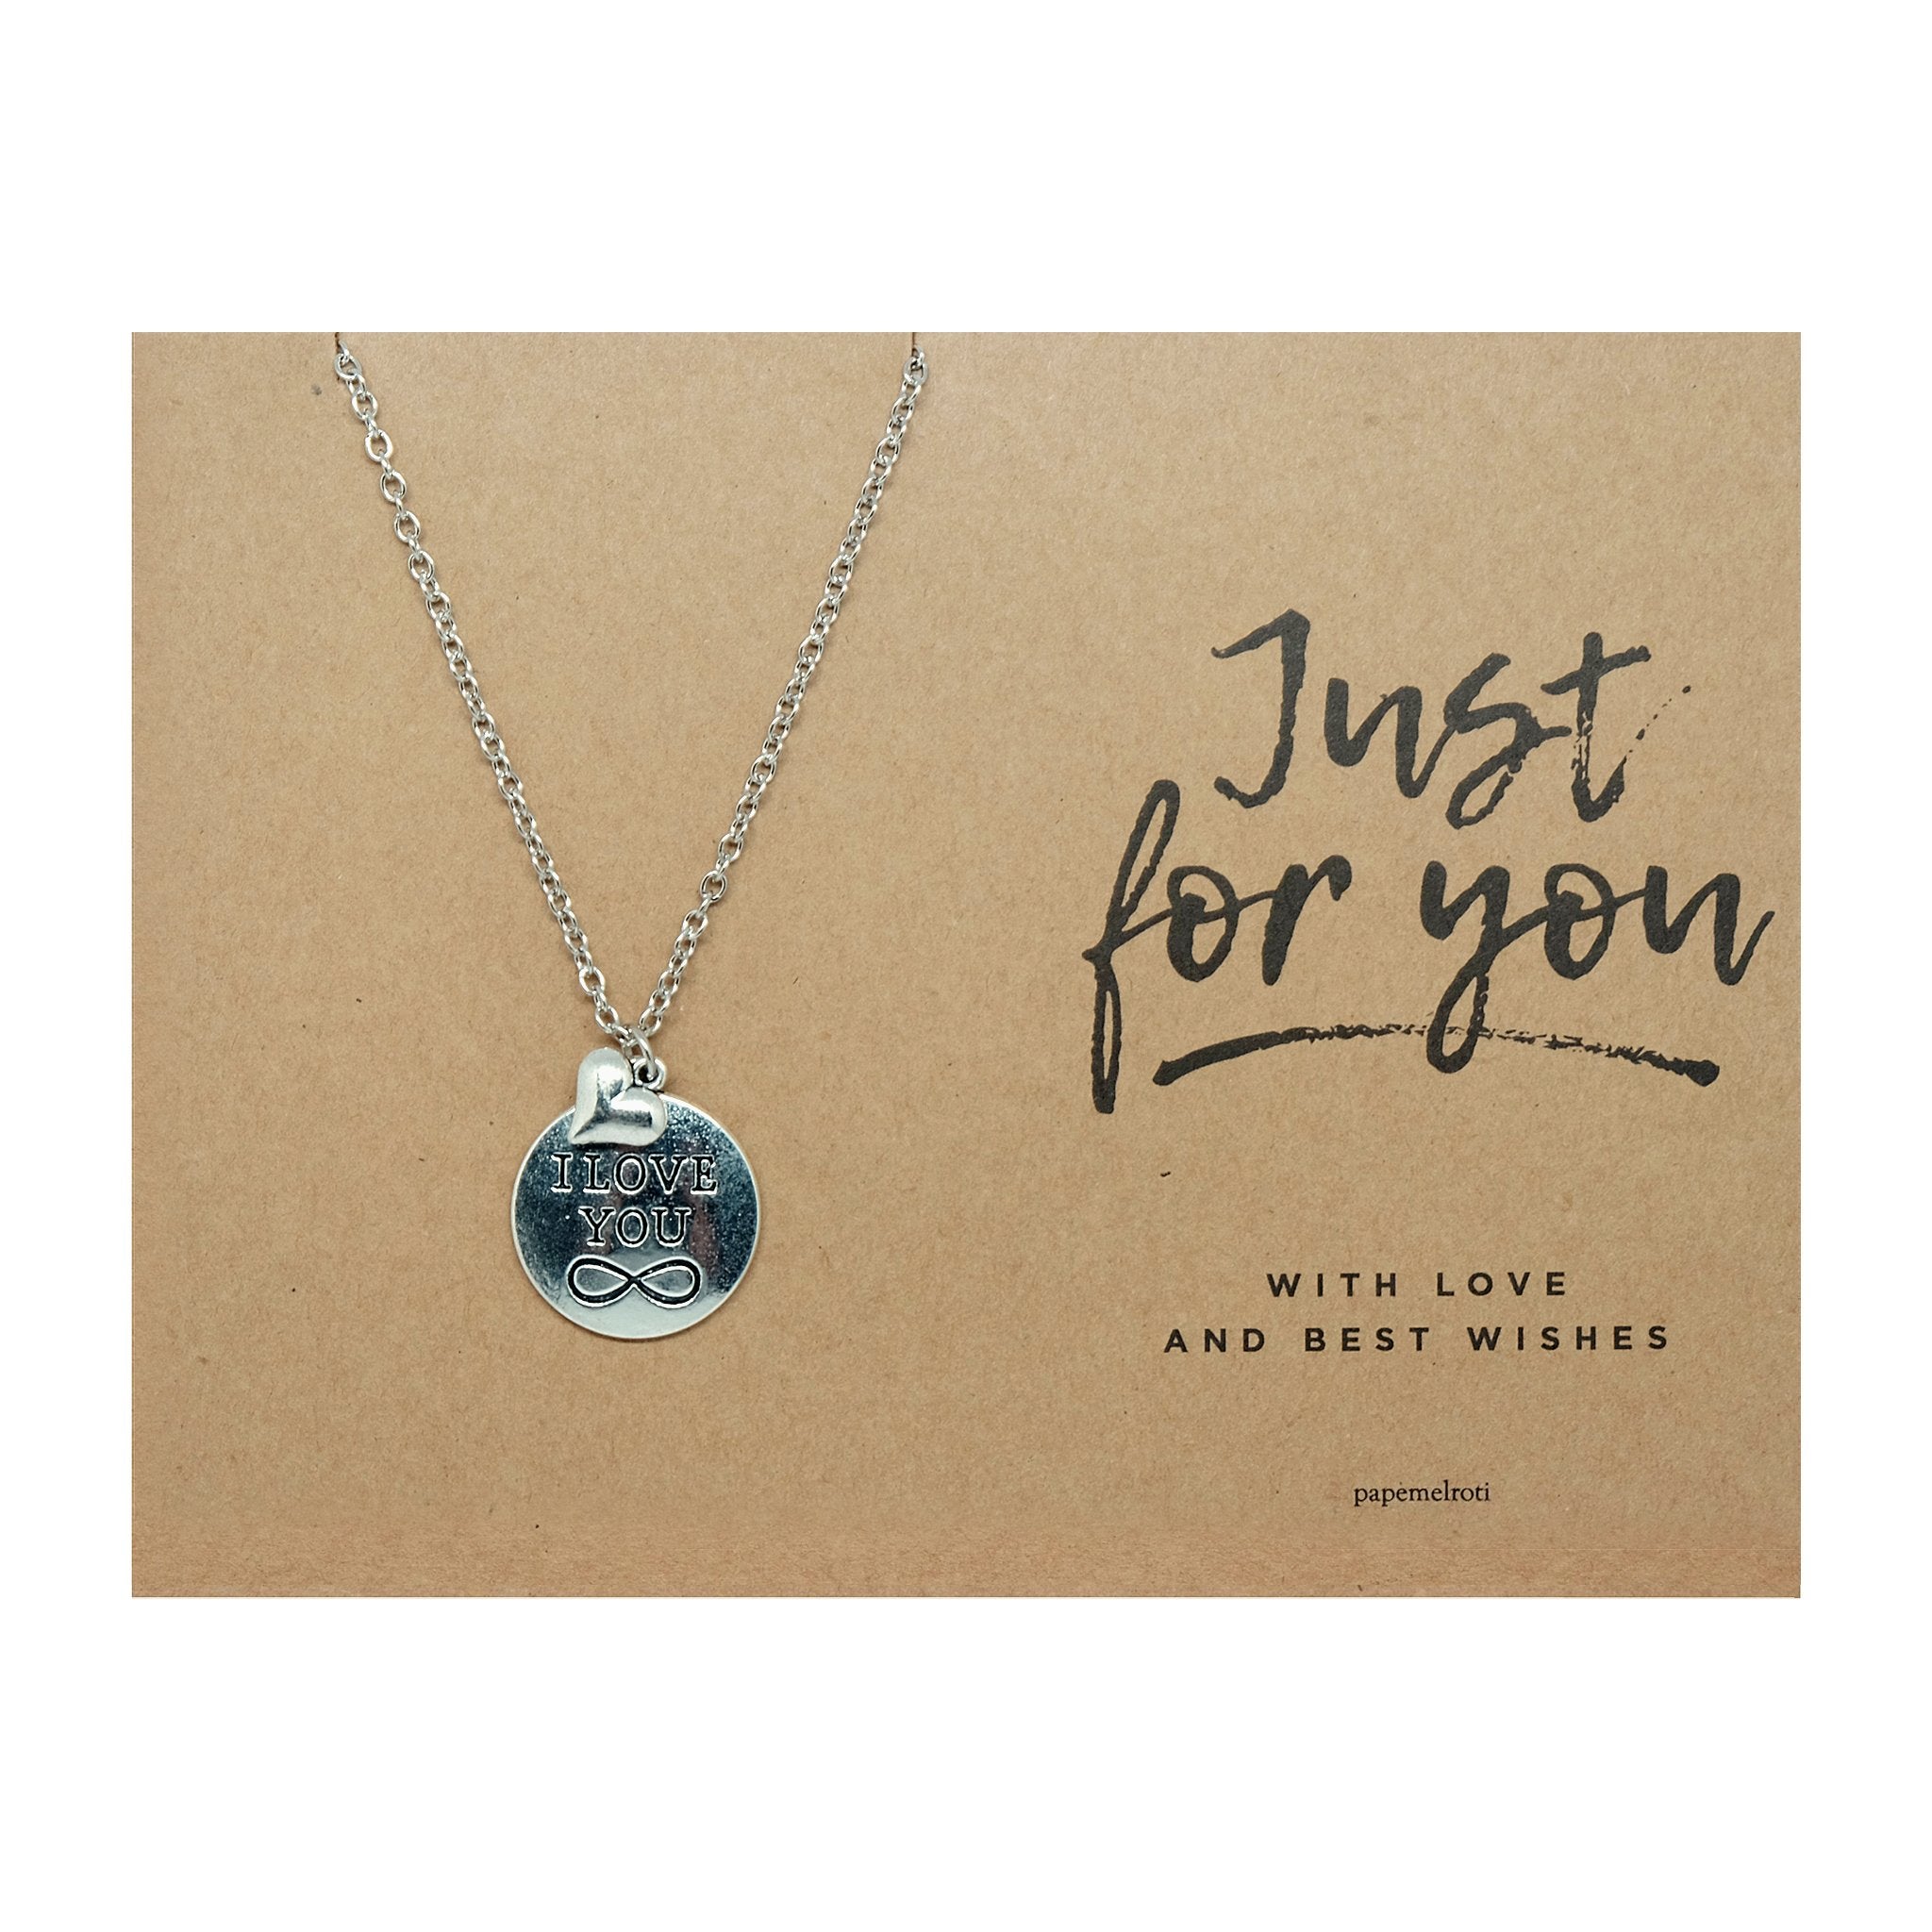 I Love You with Heart Necklace Jewelry Gift Card